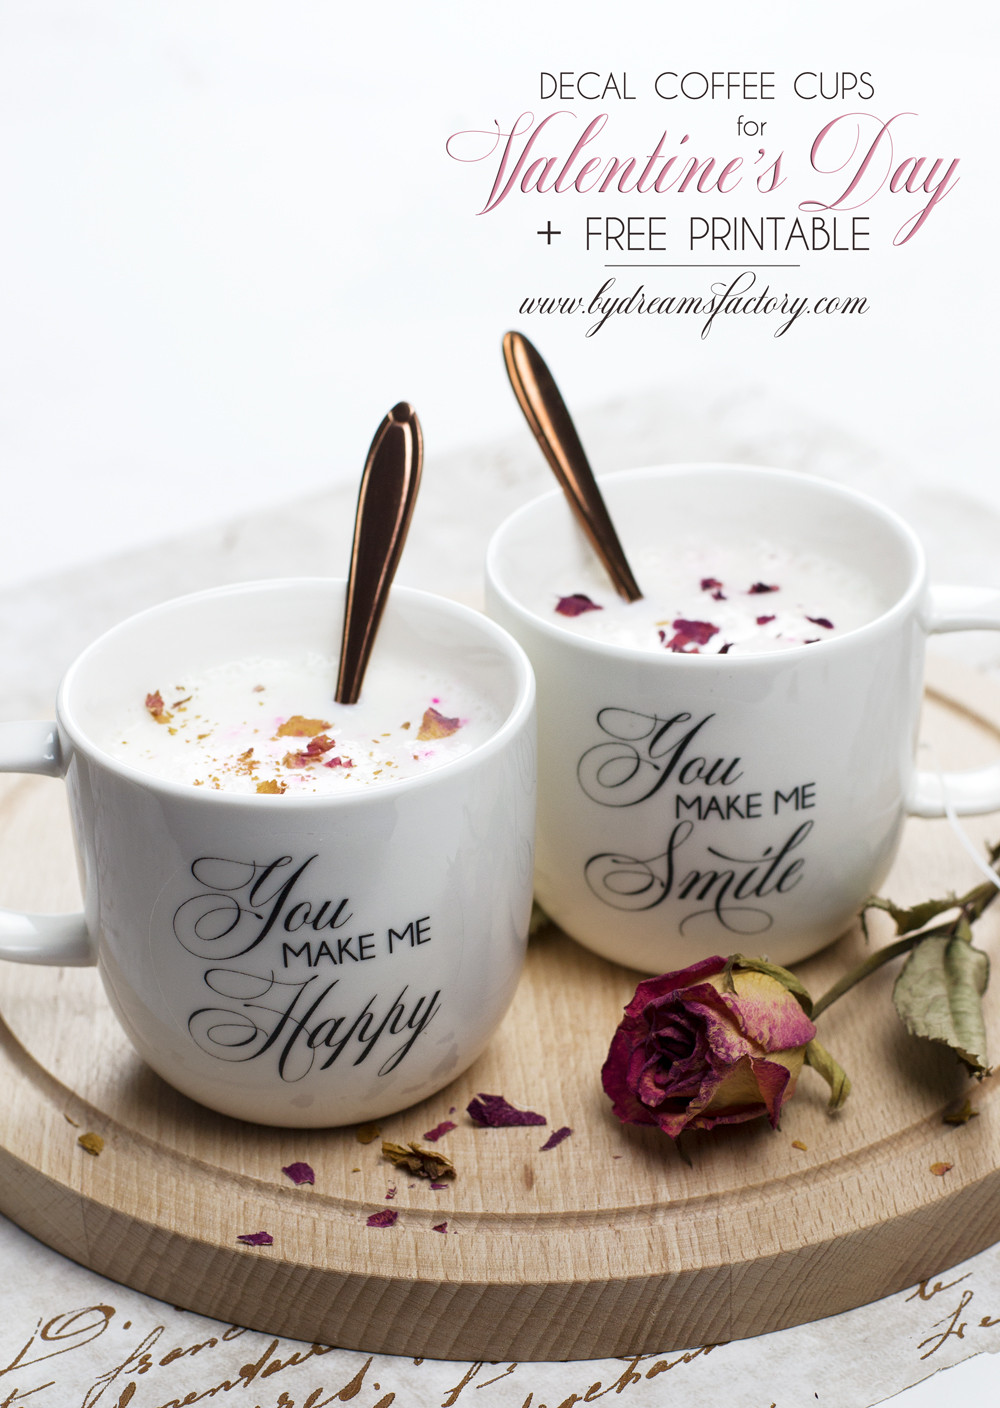 Valentines Day Coffee Drinks
 DIY Decal coffee cups for Valentine s Day free printable